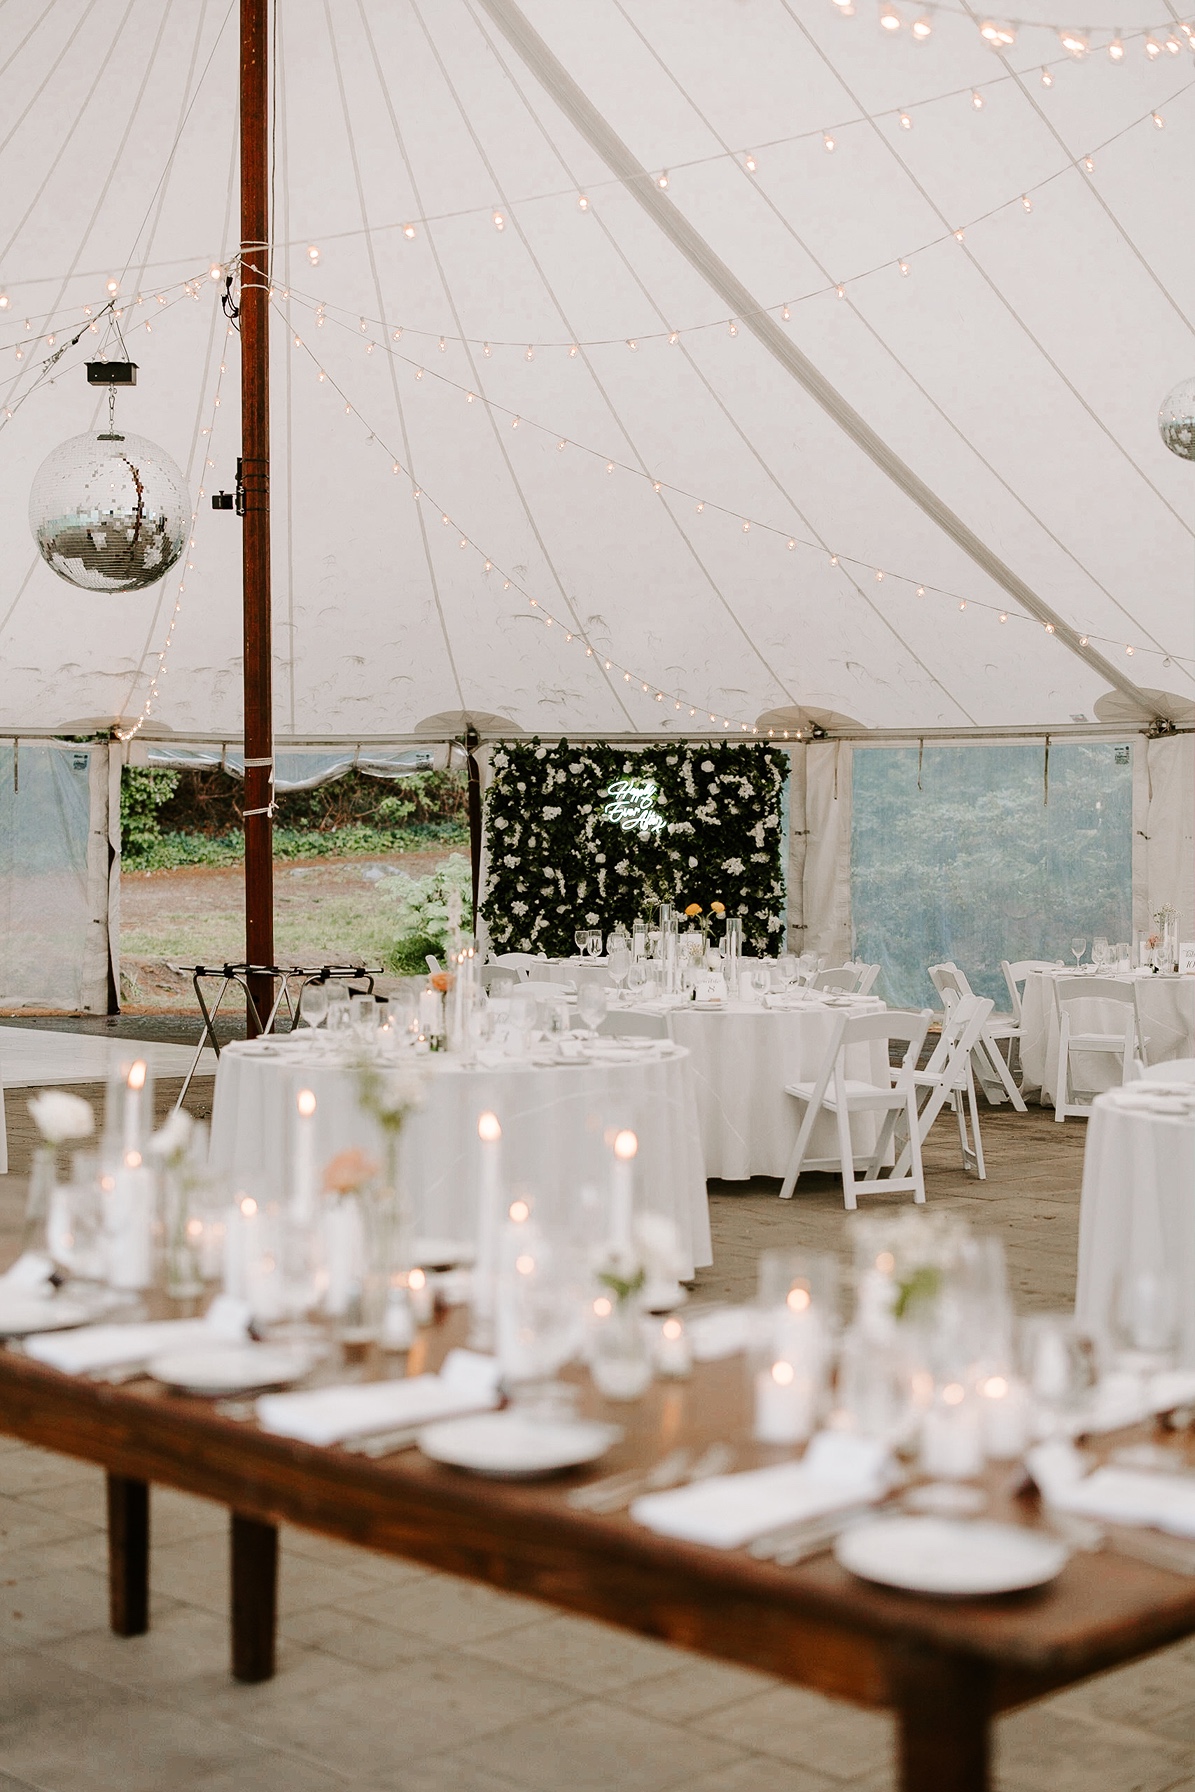 Wedding reception decor for the tented reception